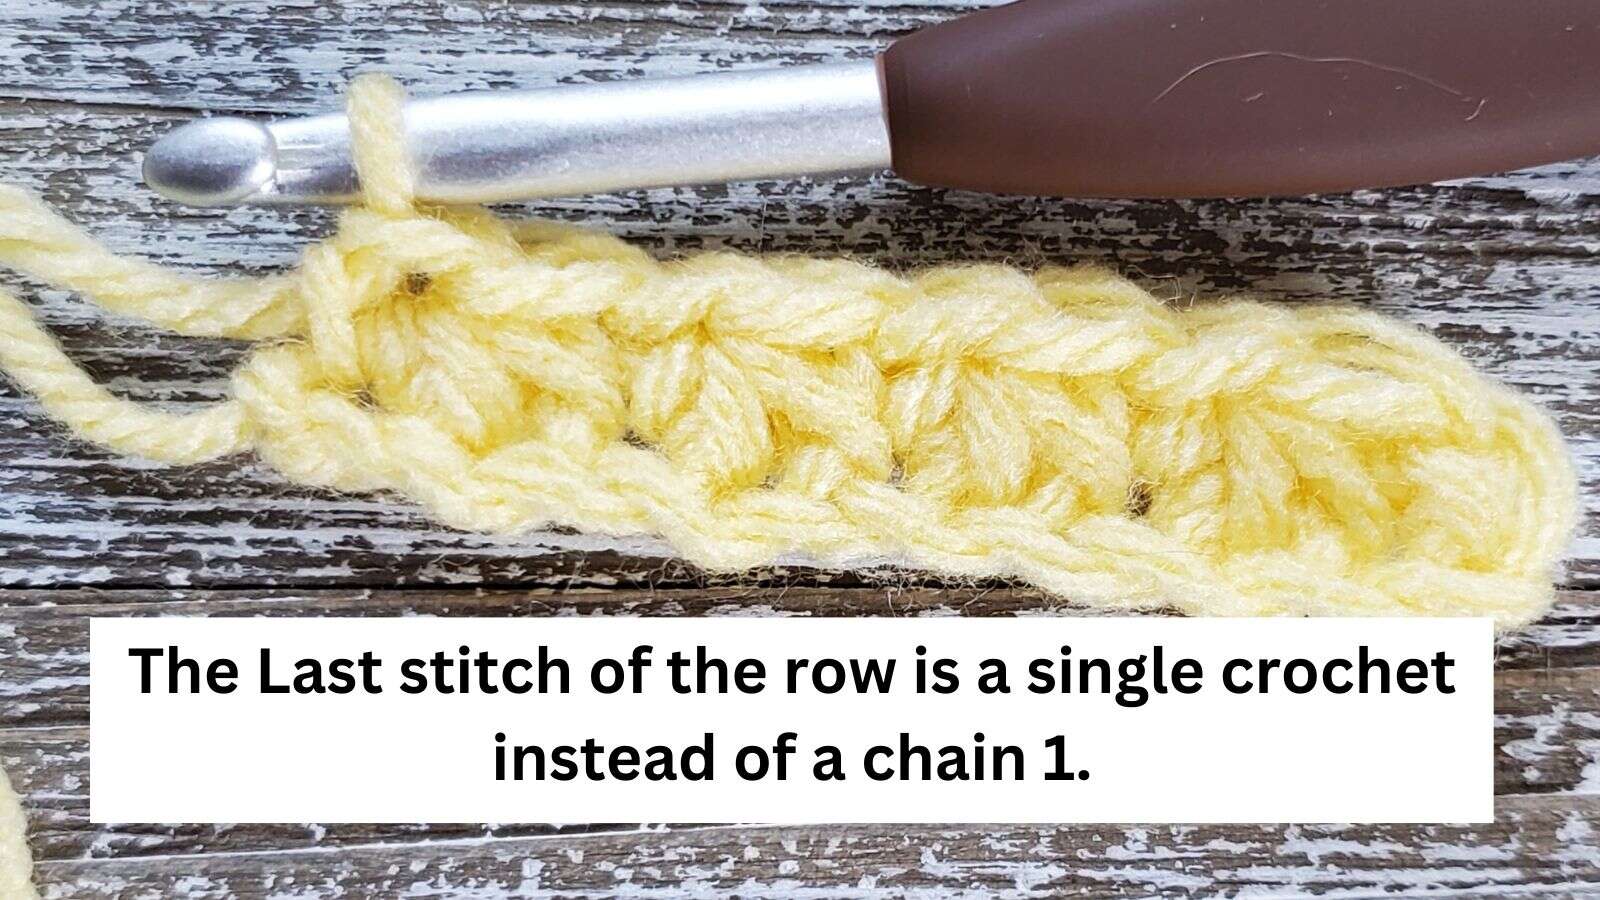 A single crochet stitch completed in the last stitch of the row.